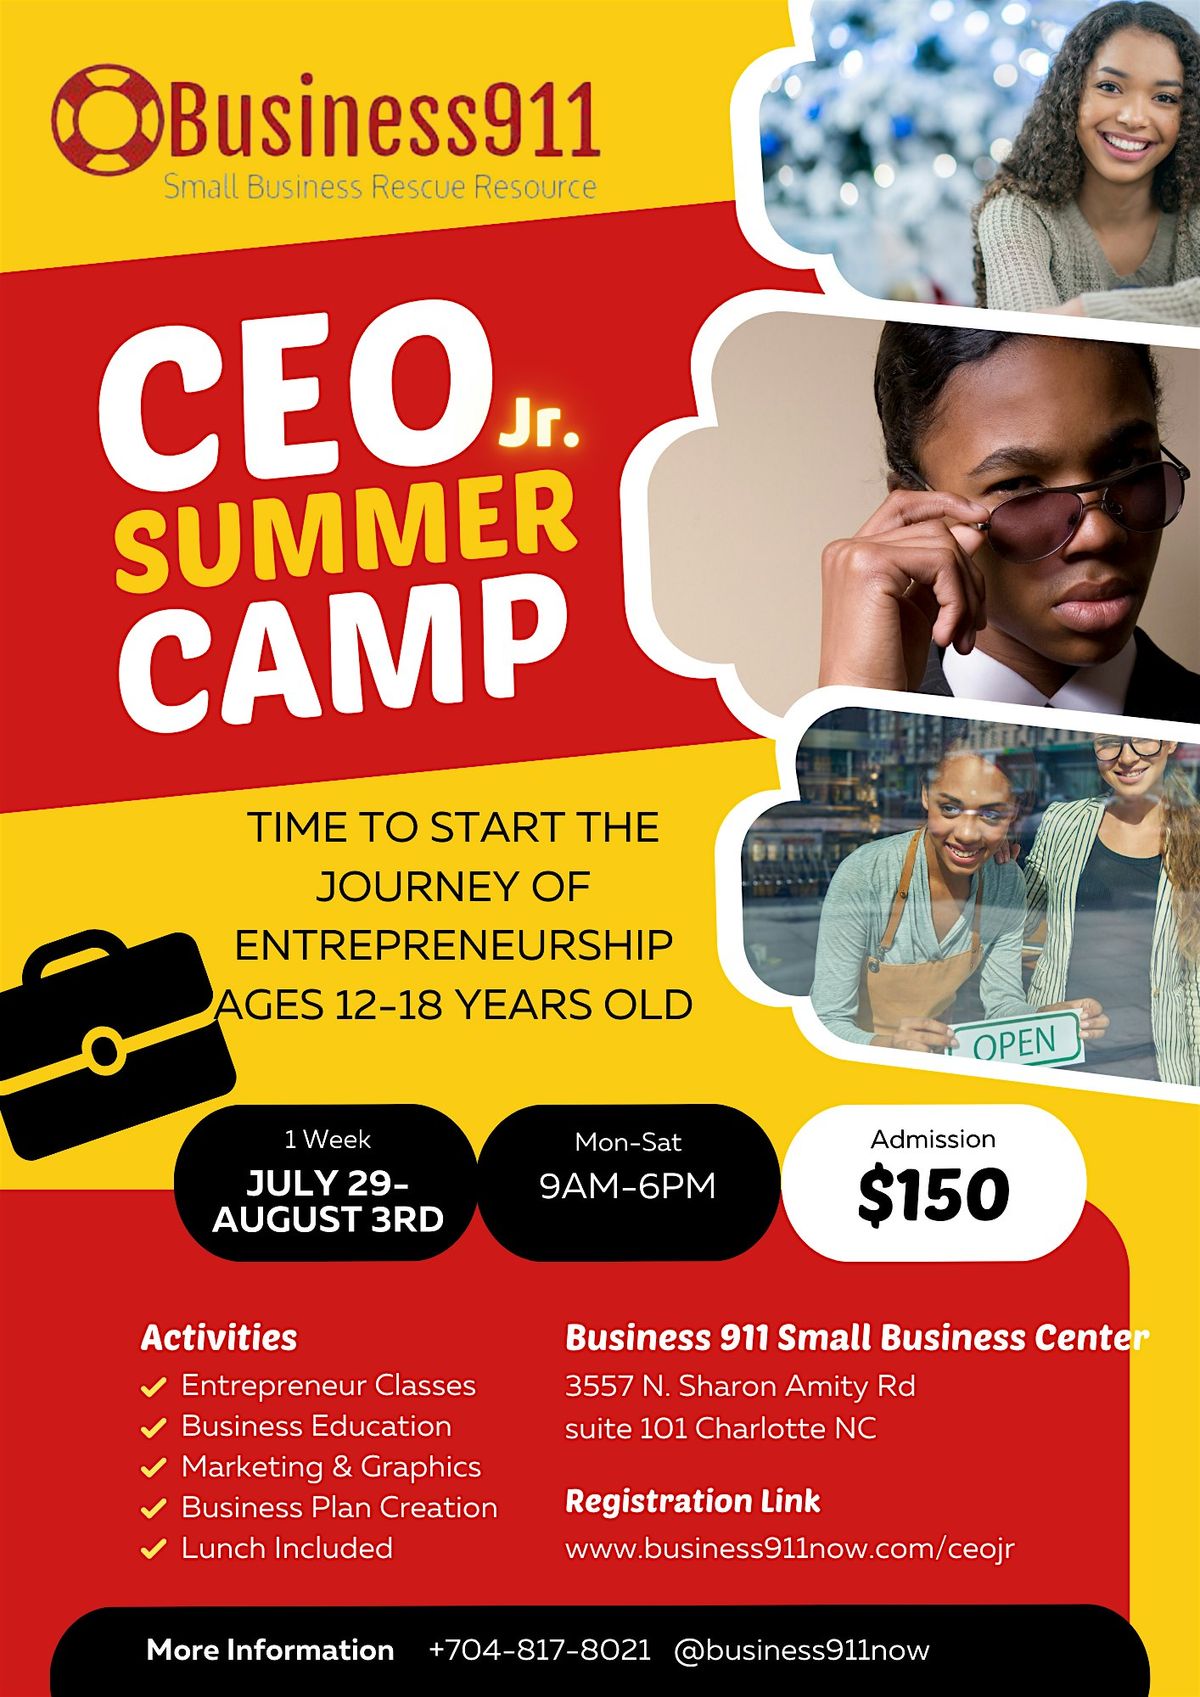 CEO Jr. Youth Summer Camp